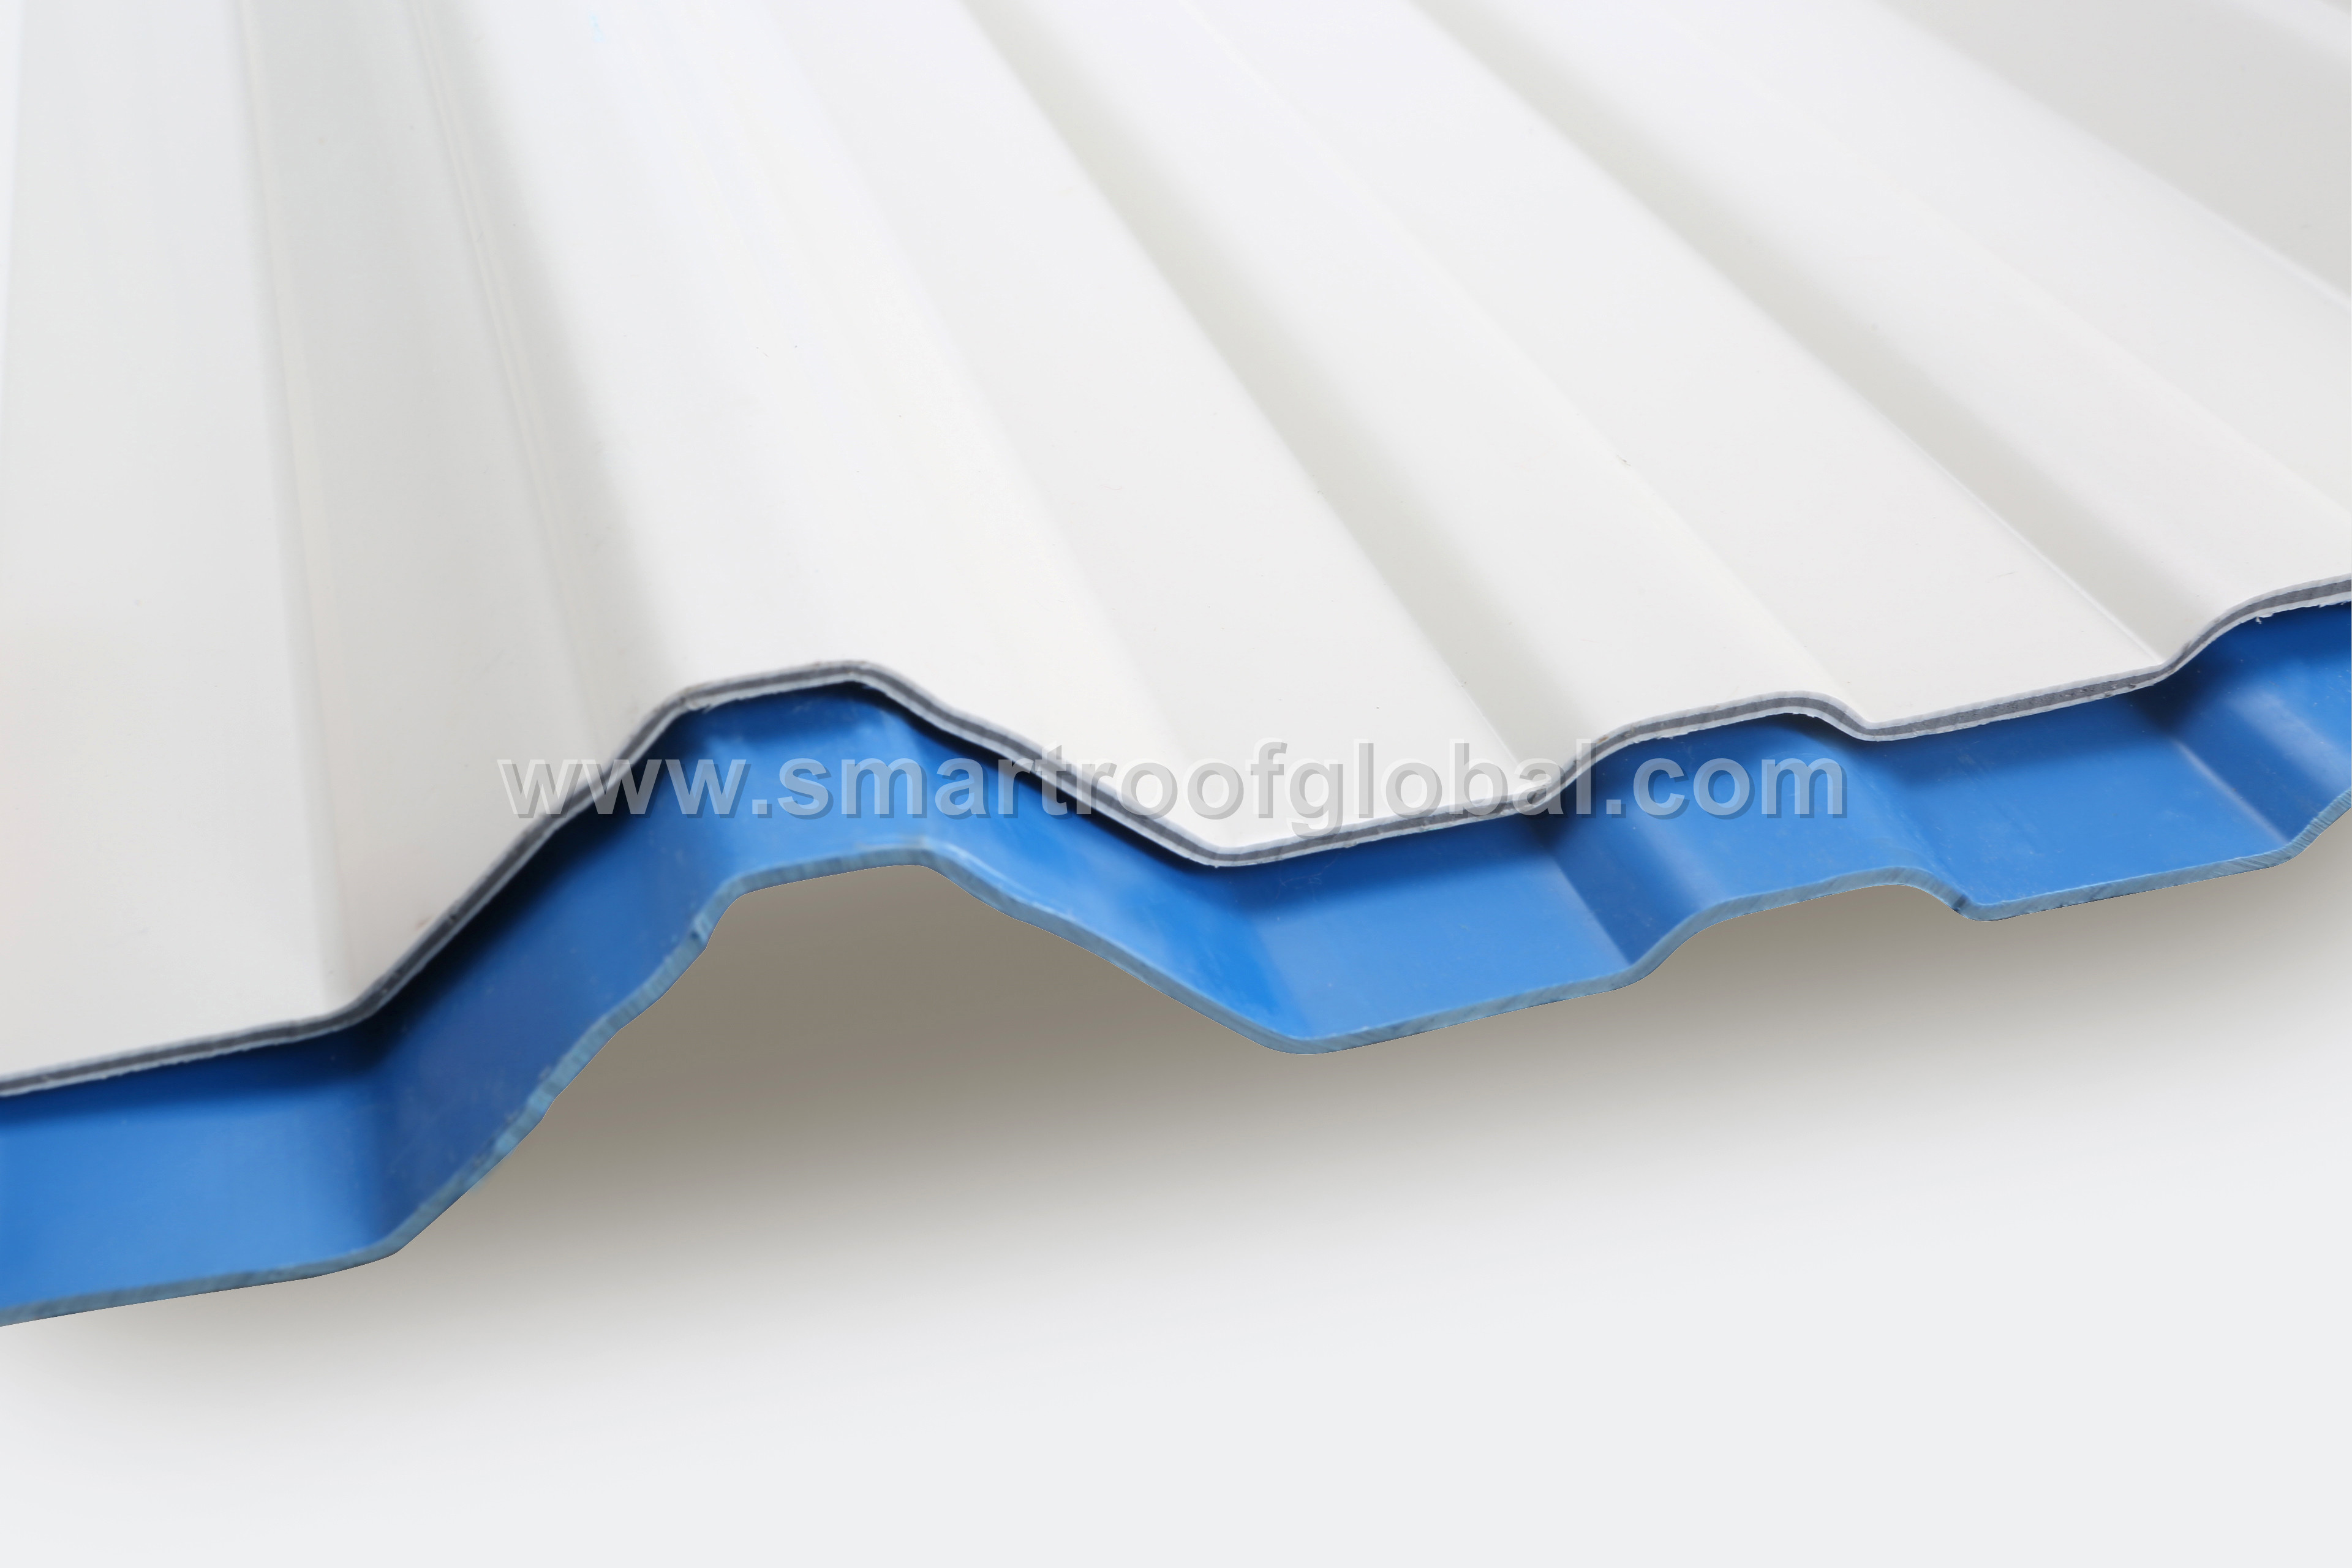 Competitive Price for Black Roofing Tiles Houses - Corrugated Polycarbonate – Smartroof